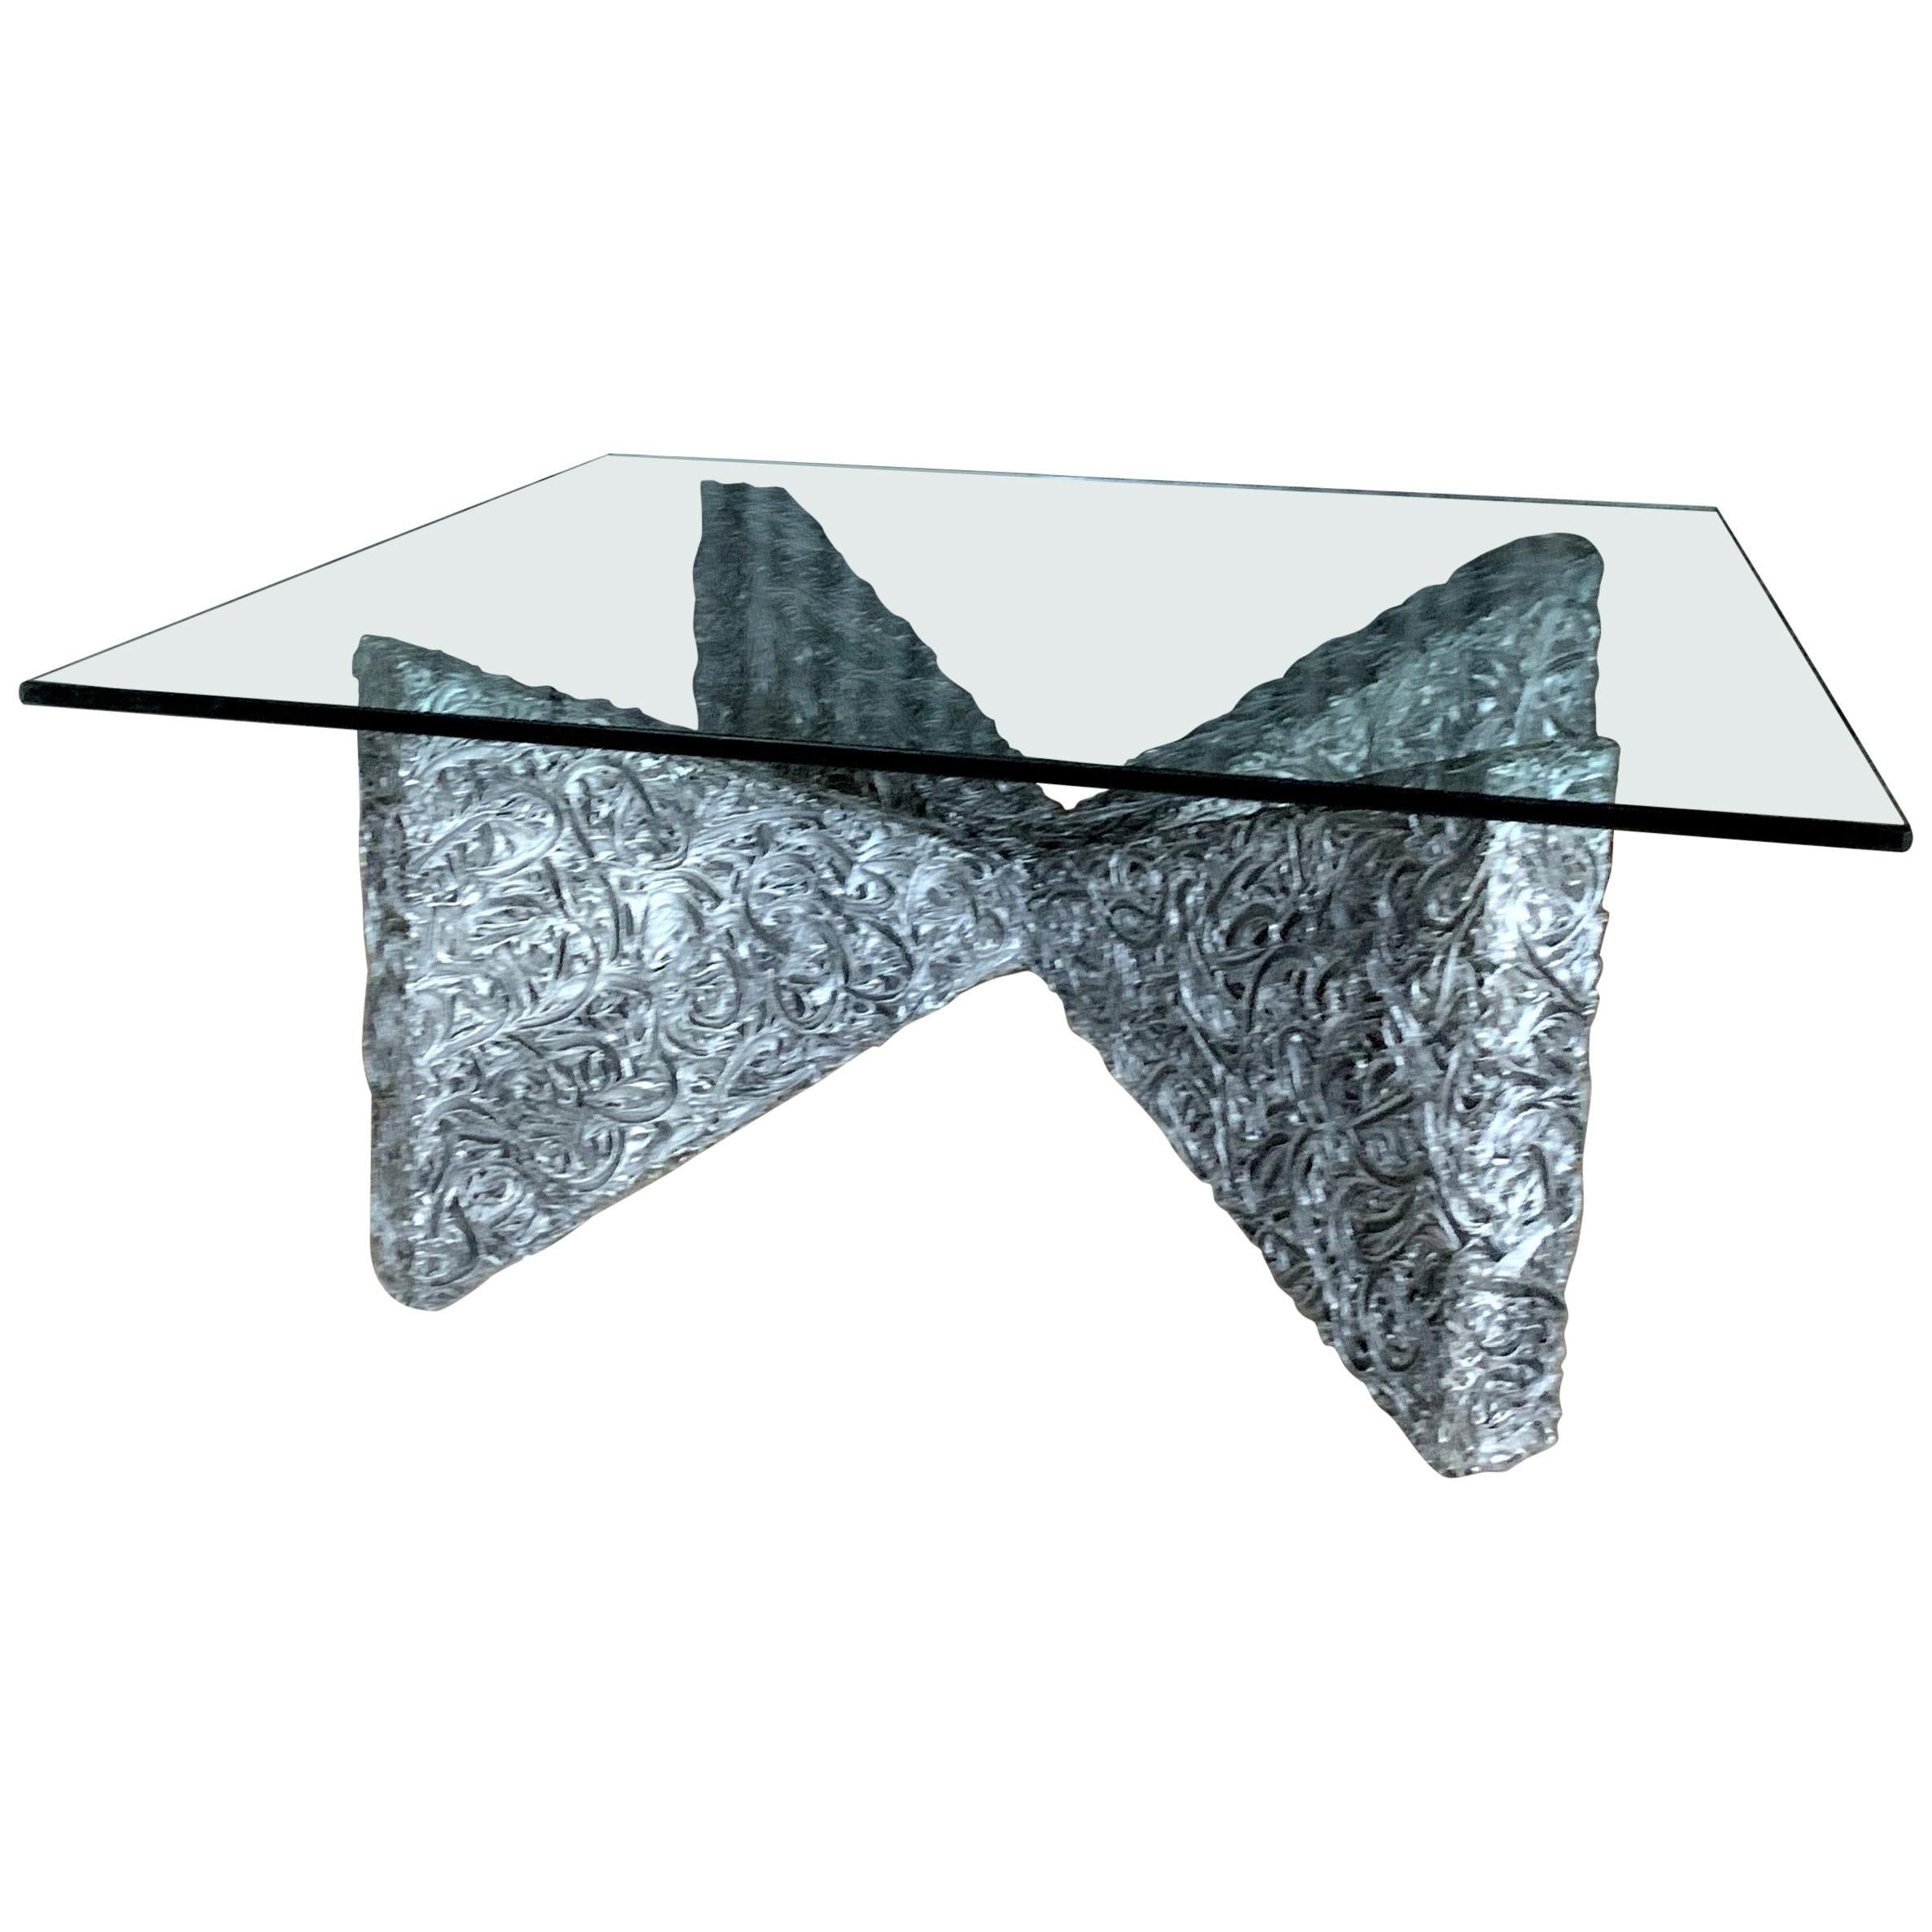 Adrian Pearsall for Craft Associates Brutalist Coffee Table